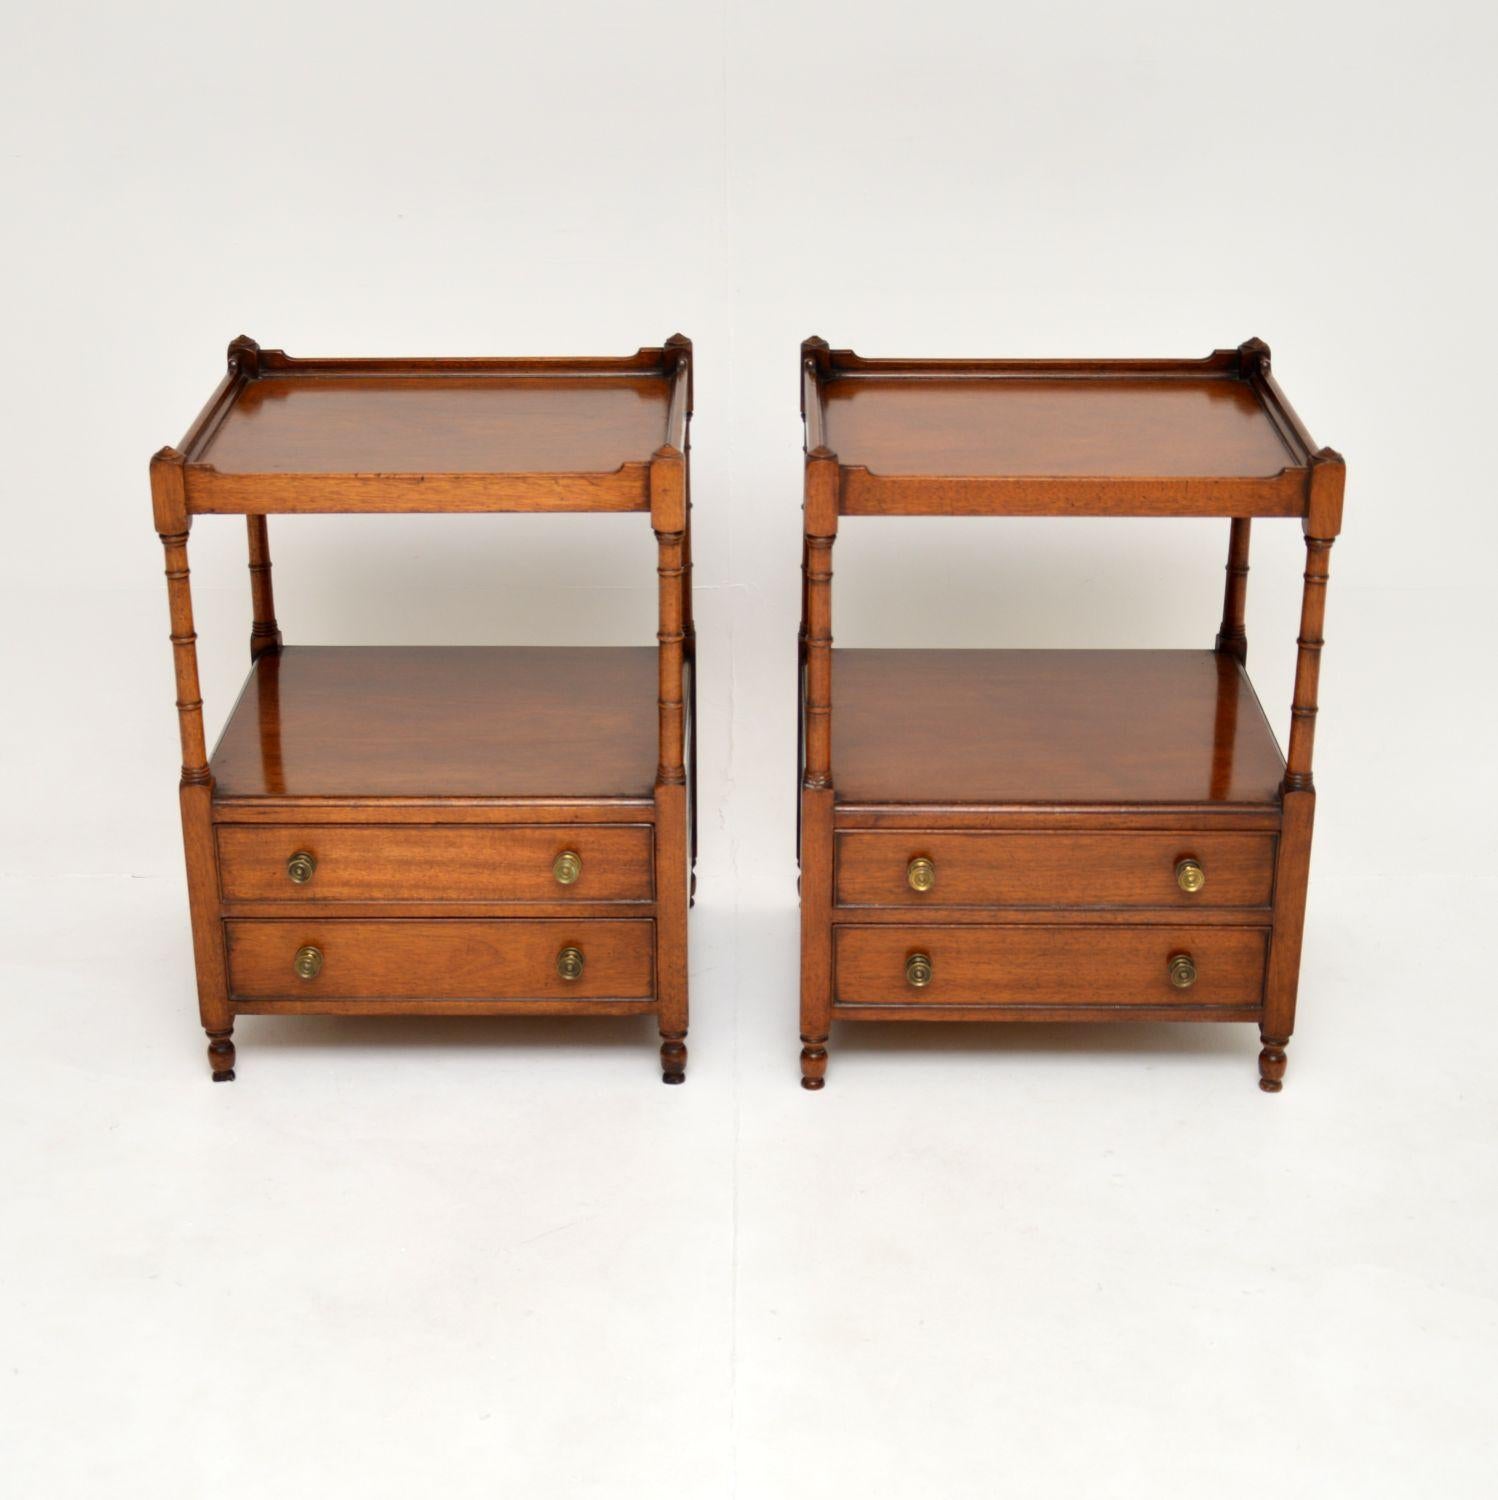 A smart and very well made pair of antique Georgian style side tables. They were made in England, they date from around the 1950’s.

The quality is excellent, they have two useful tiers with two drawers in the lower section. They are nicely polished